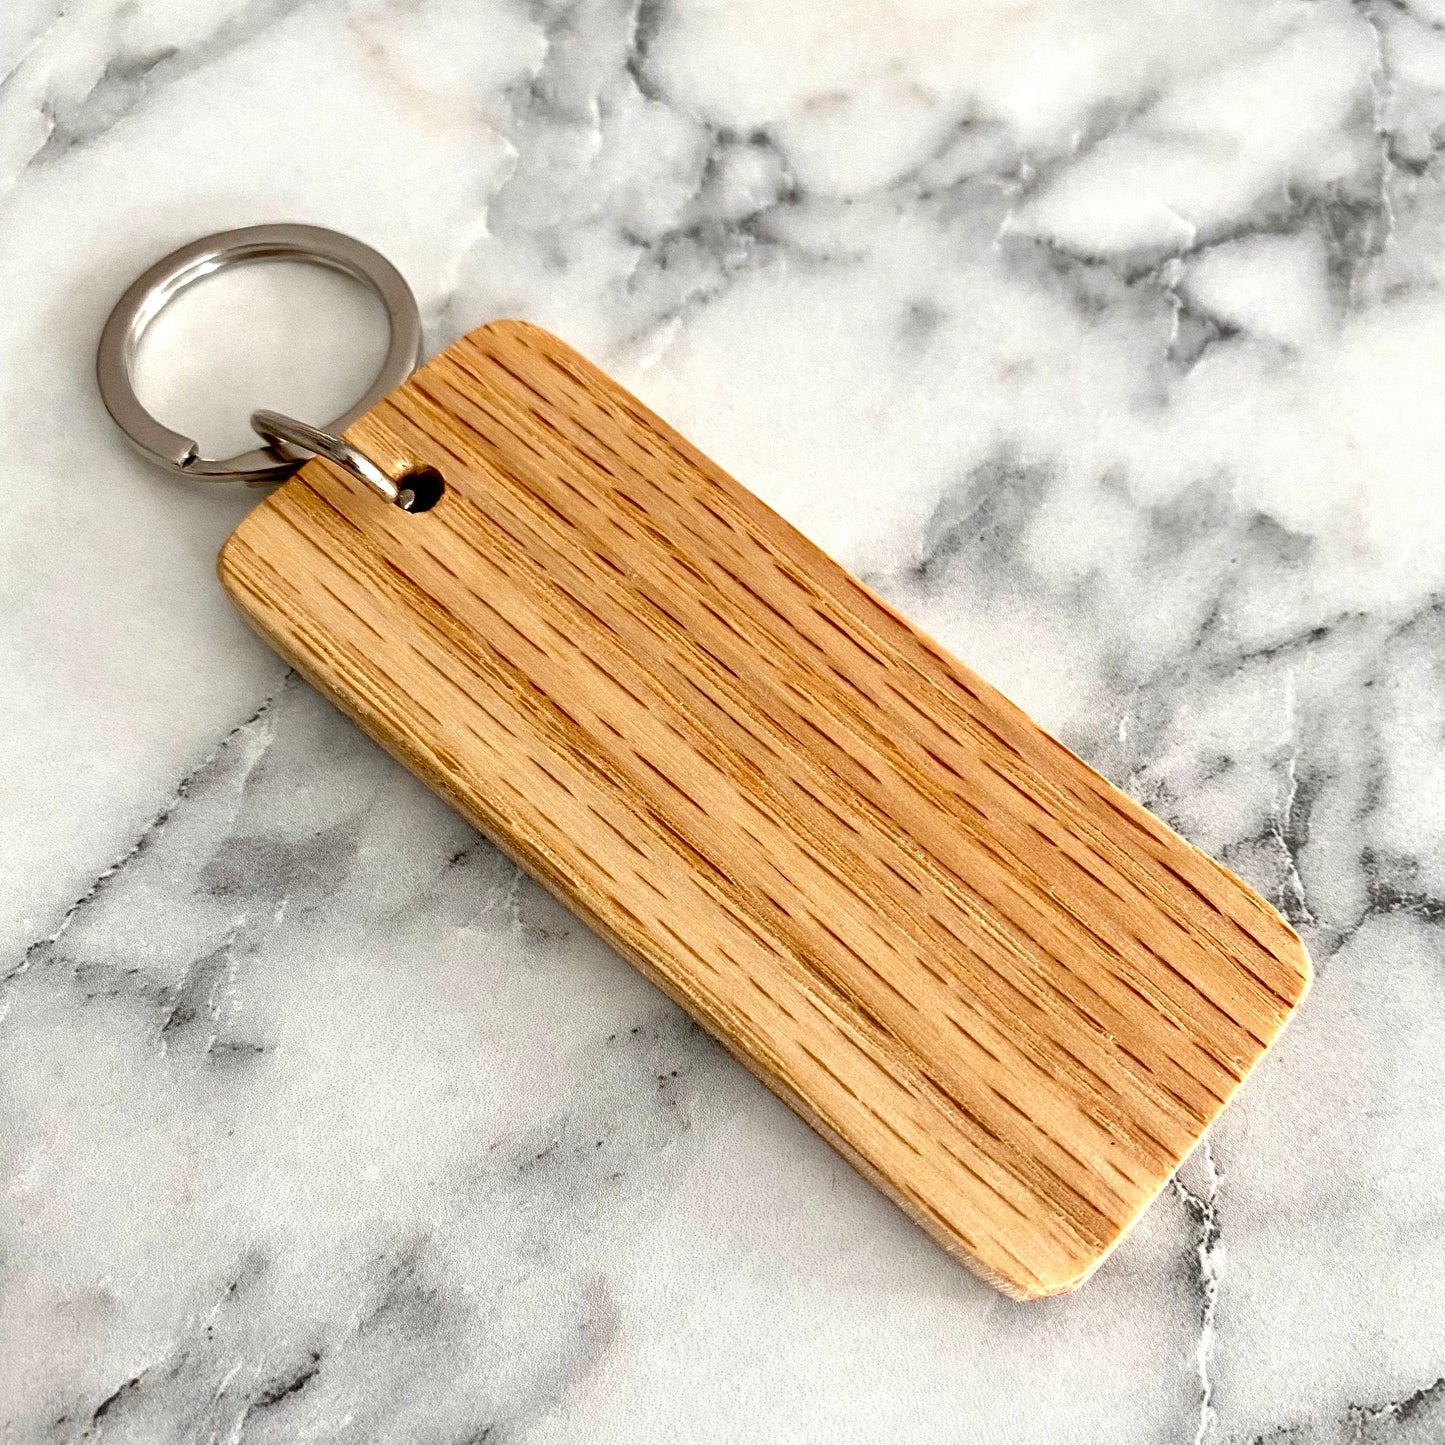 Personalized "Lost Keys" Engraved Wood Keychain